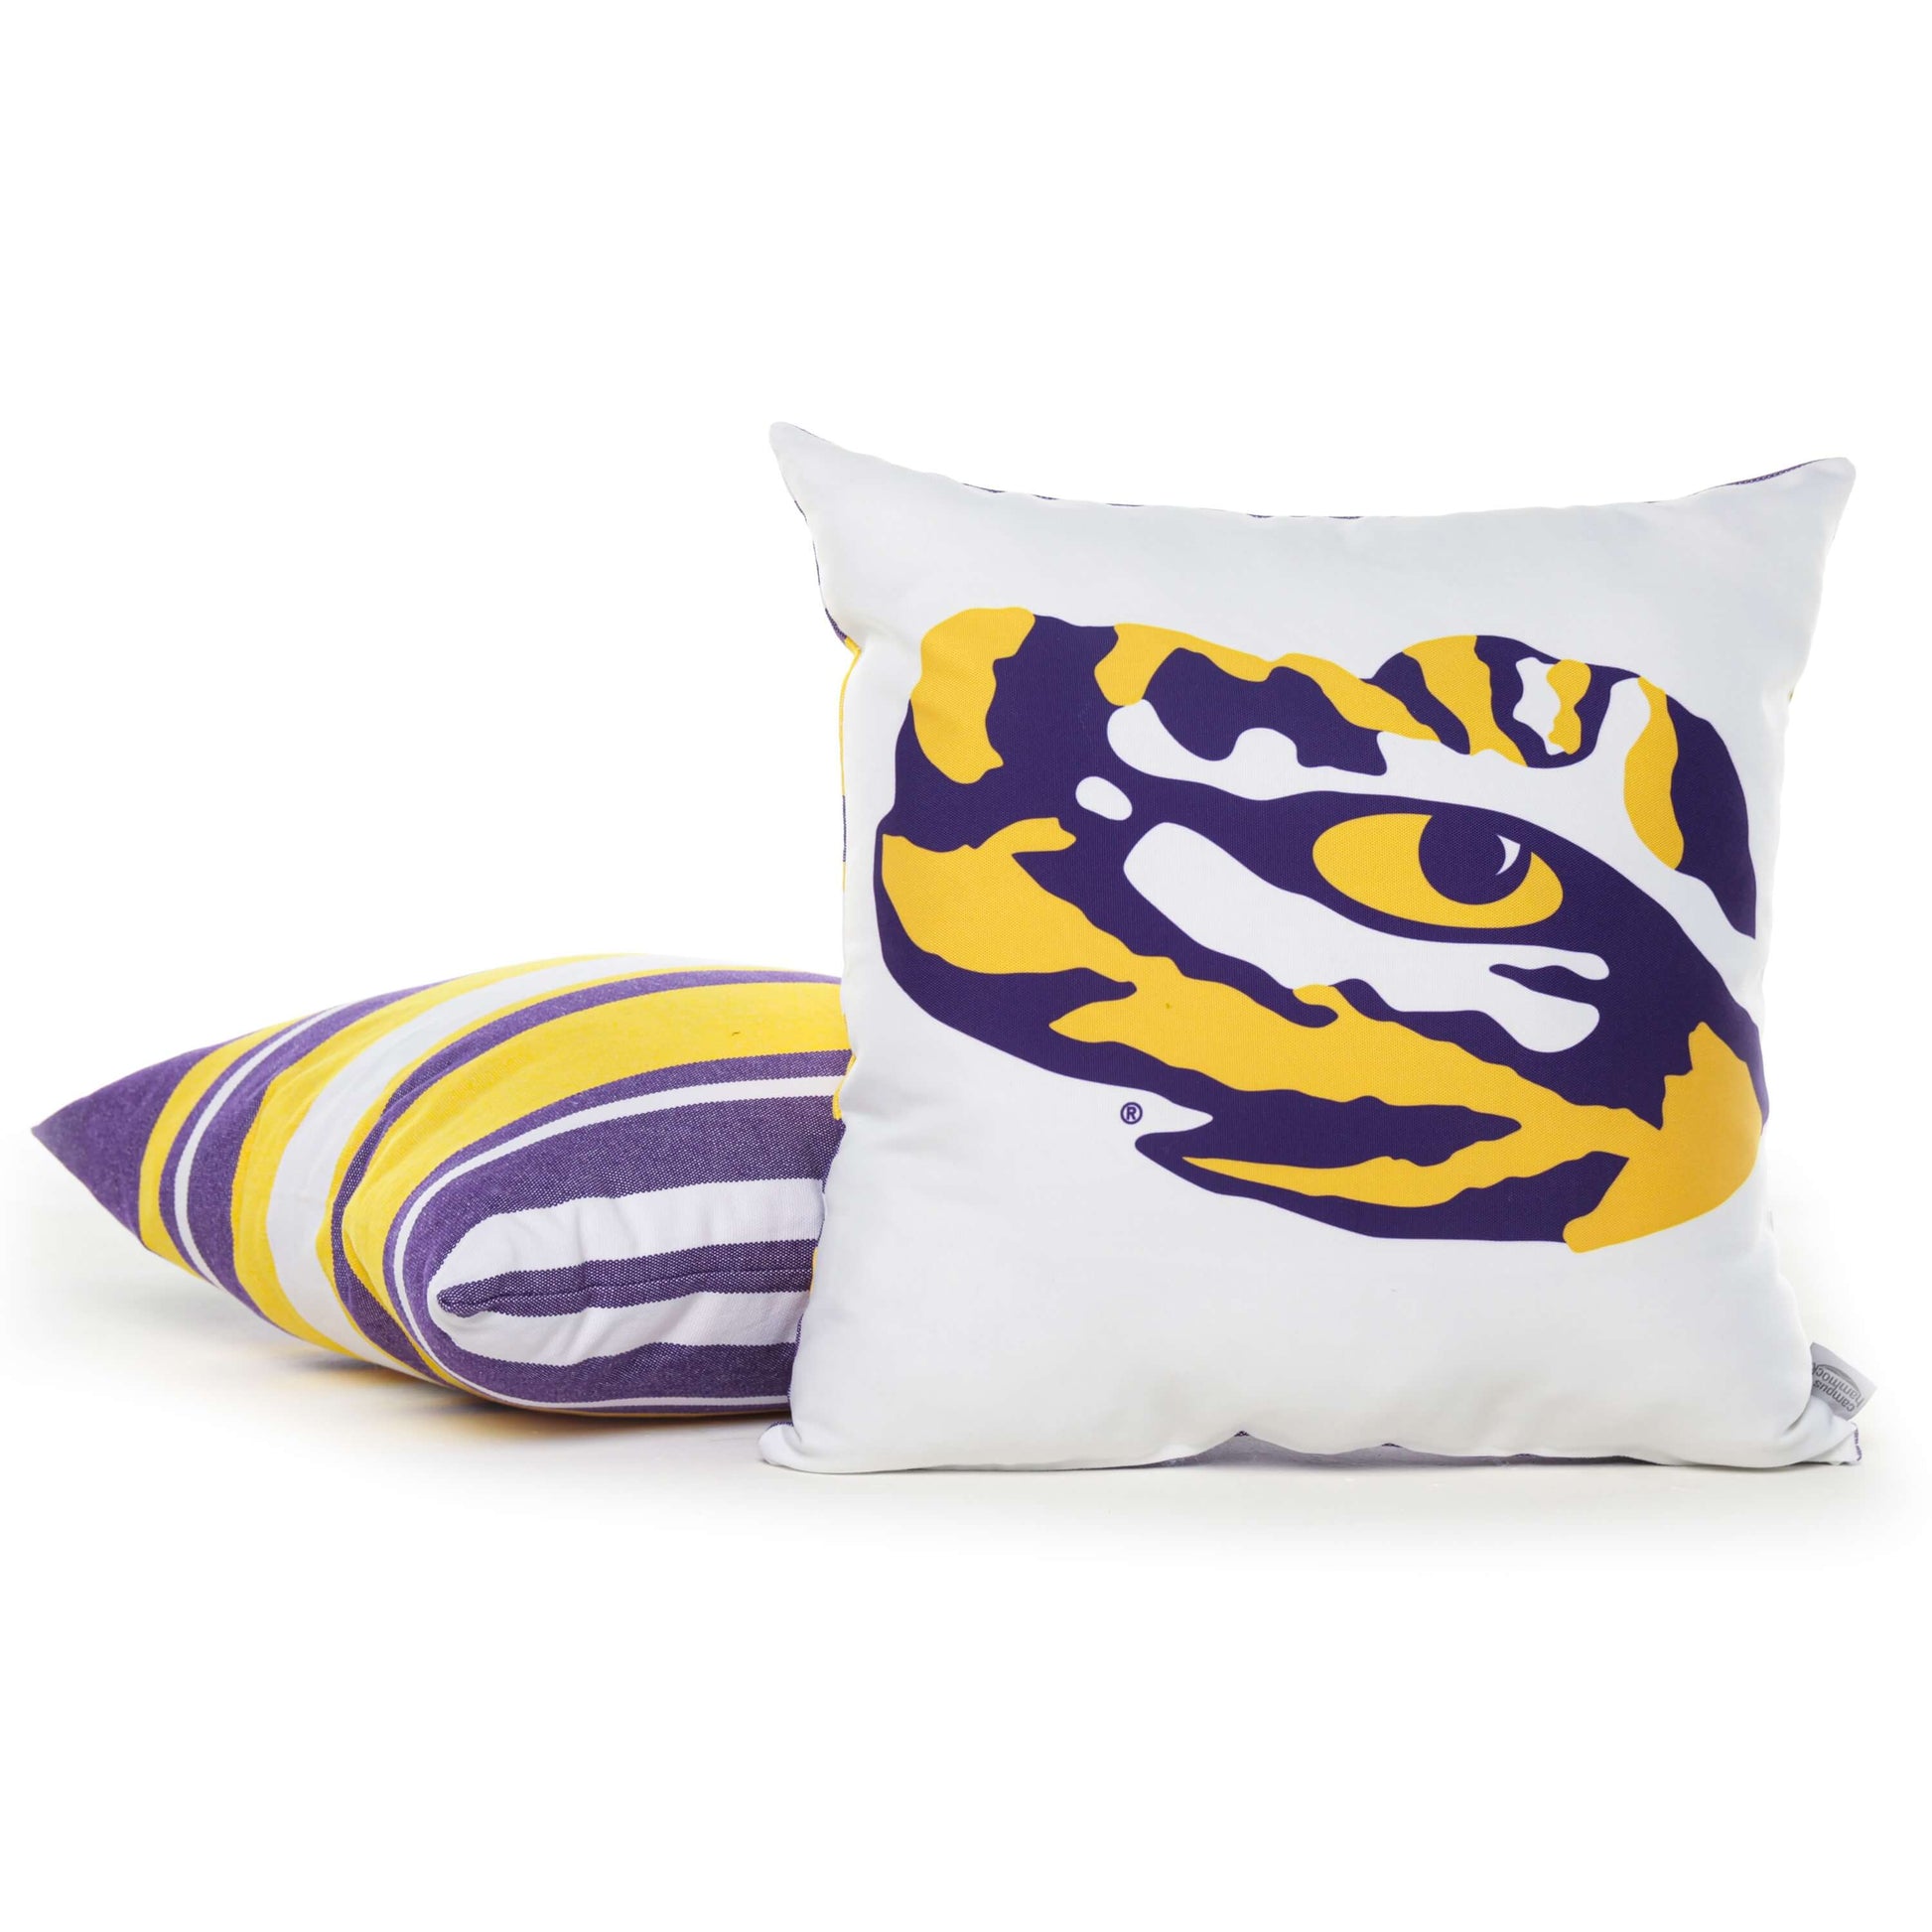 LSU Tigers Hanging Chair Swing Pillows